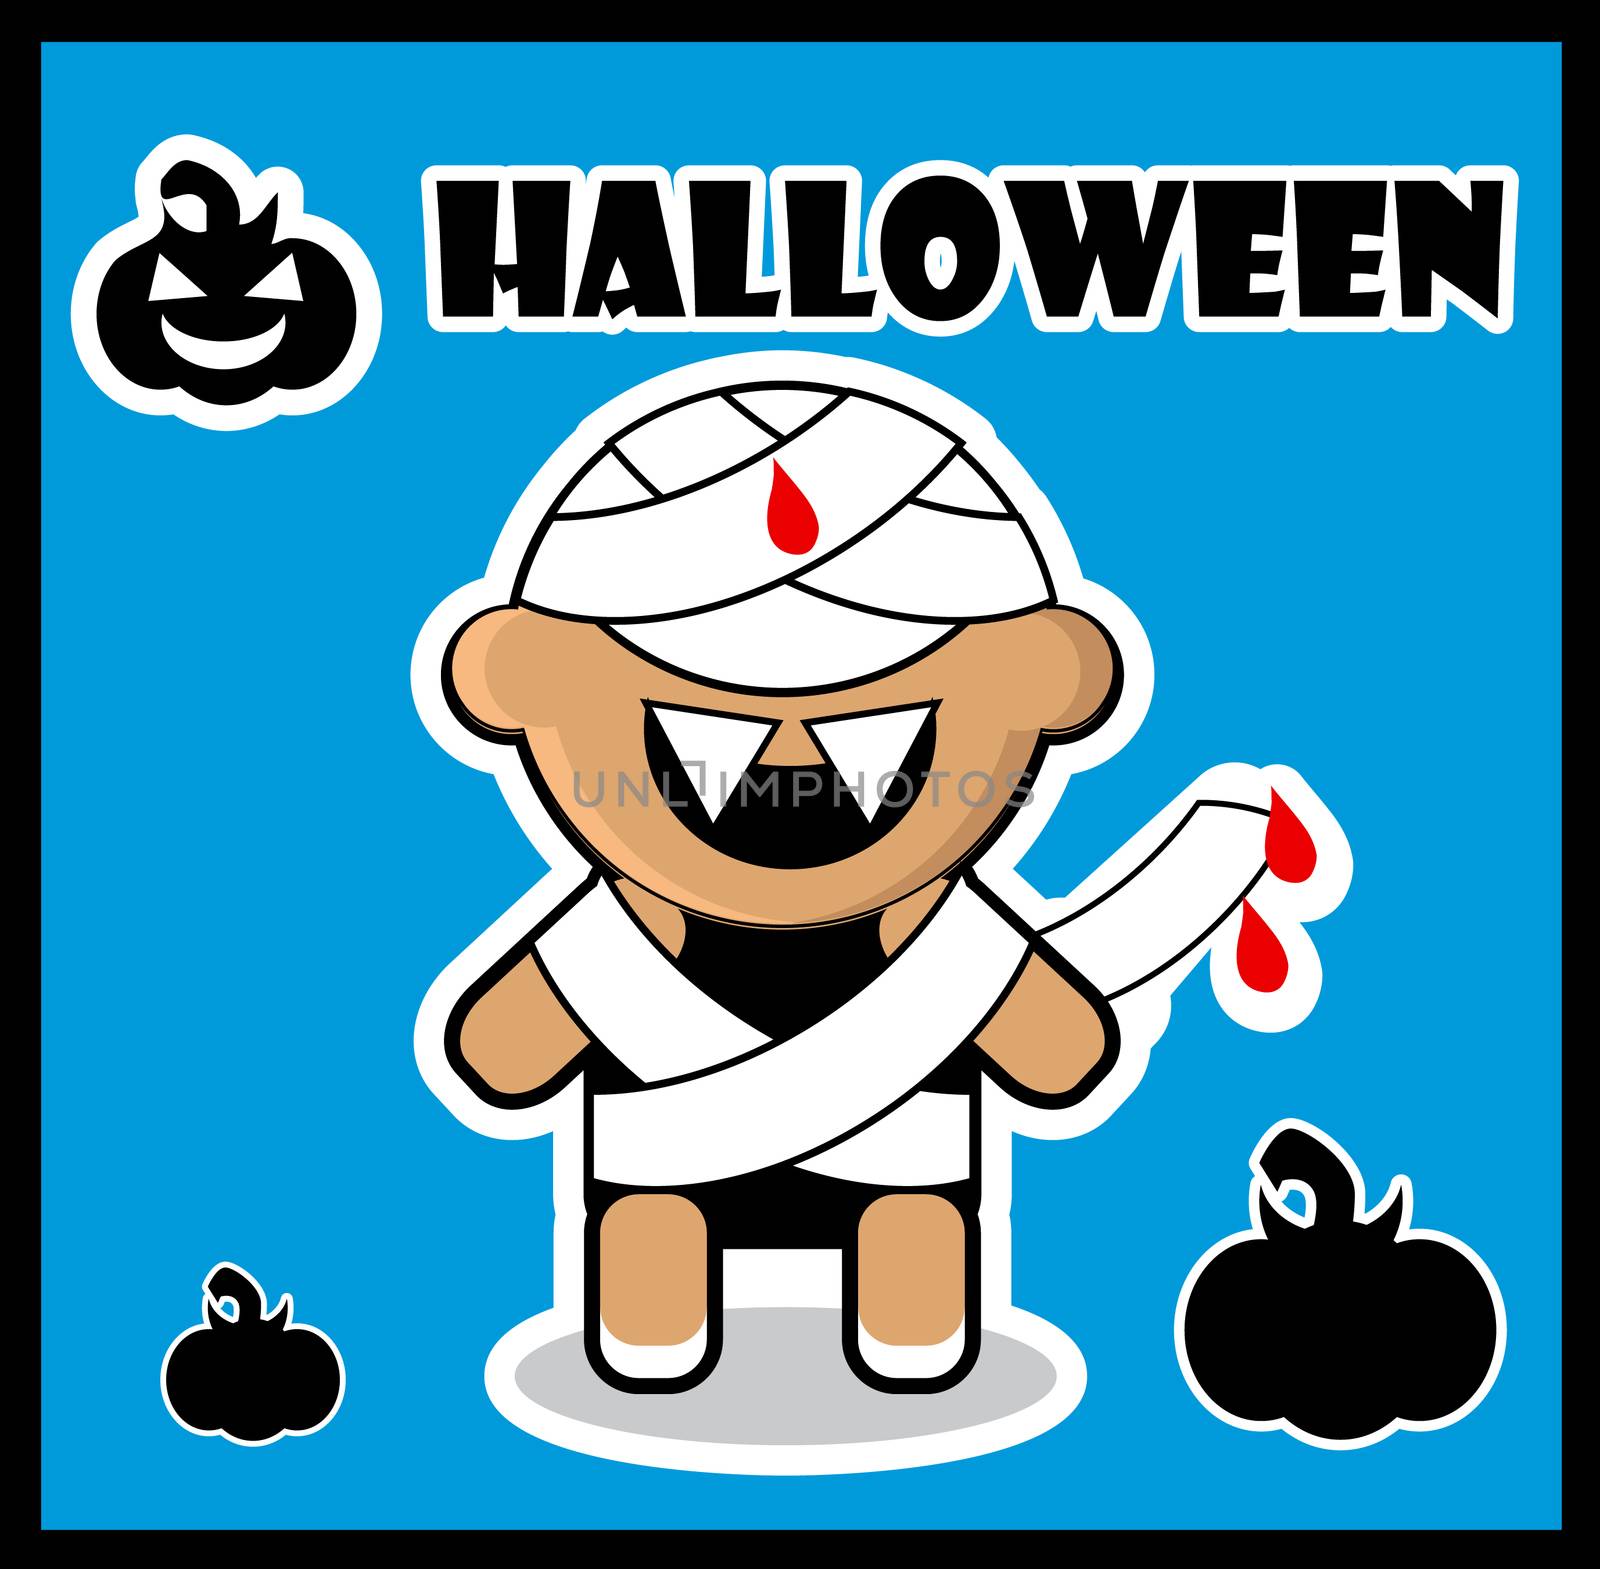 Halloween icon Zombie Mummy card poster background  Cute Halloween character - Mummy 